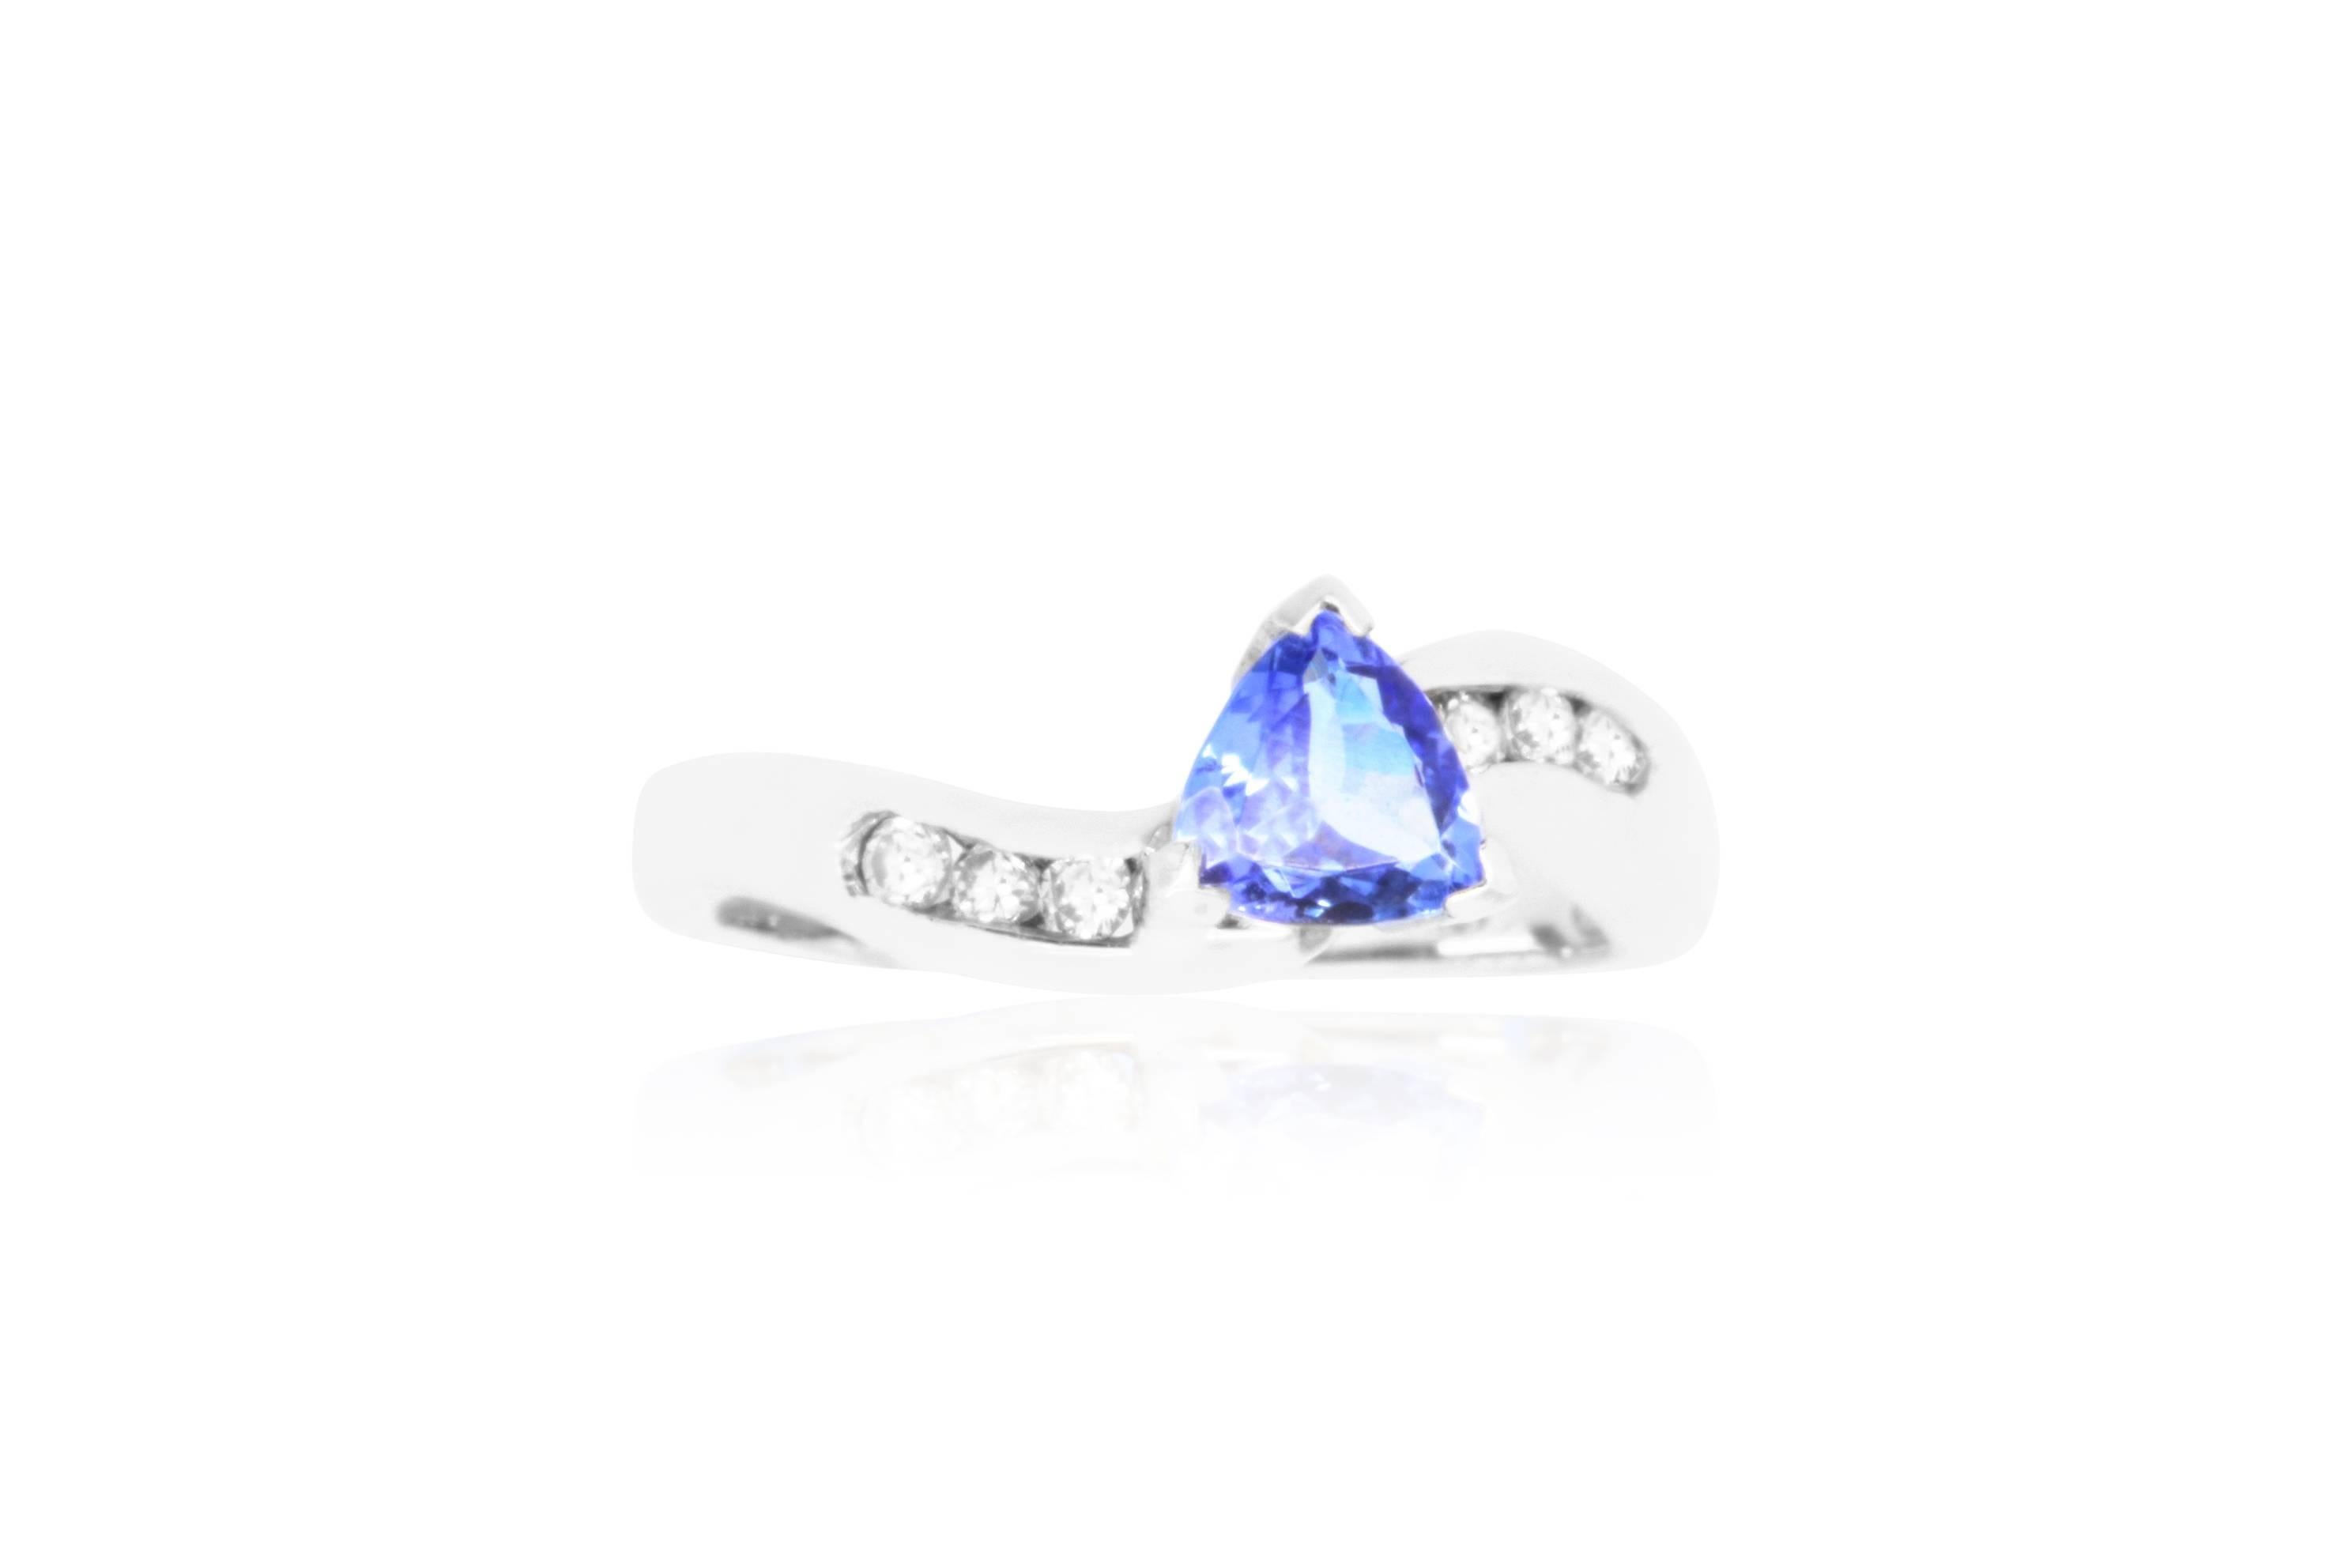 This beautiful Trillion cut Tanzanite will shine as the focal point of this piece. Set in 14k White Gold, the band sparkles with 0.19 carat brilliant round diamonds creating a seriously stunning look.

Material: 14k White Gold
Gemstones: 1 Trillion